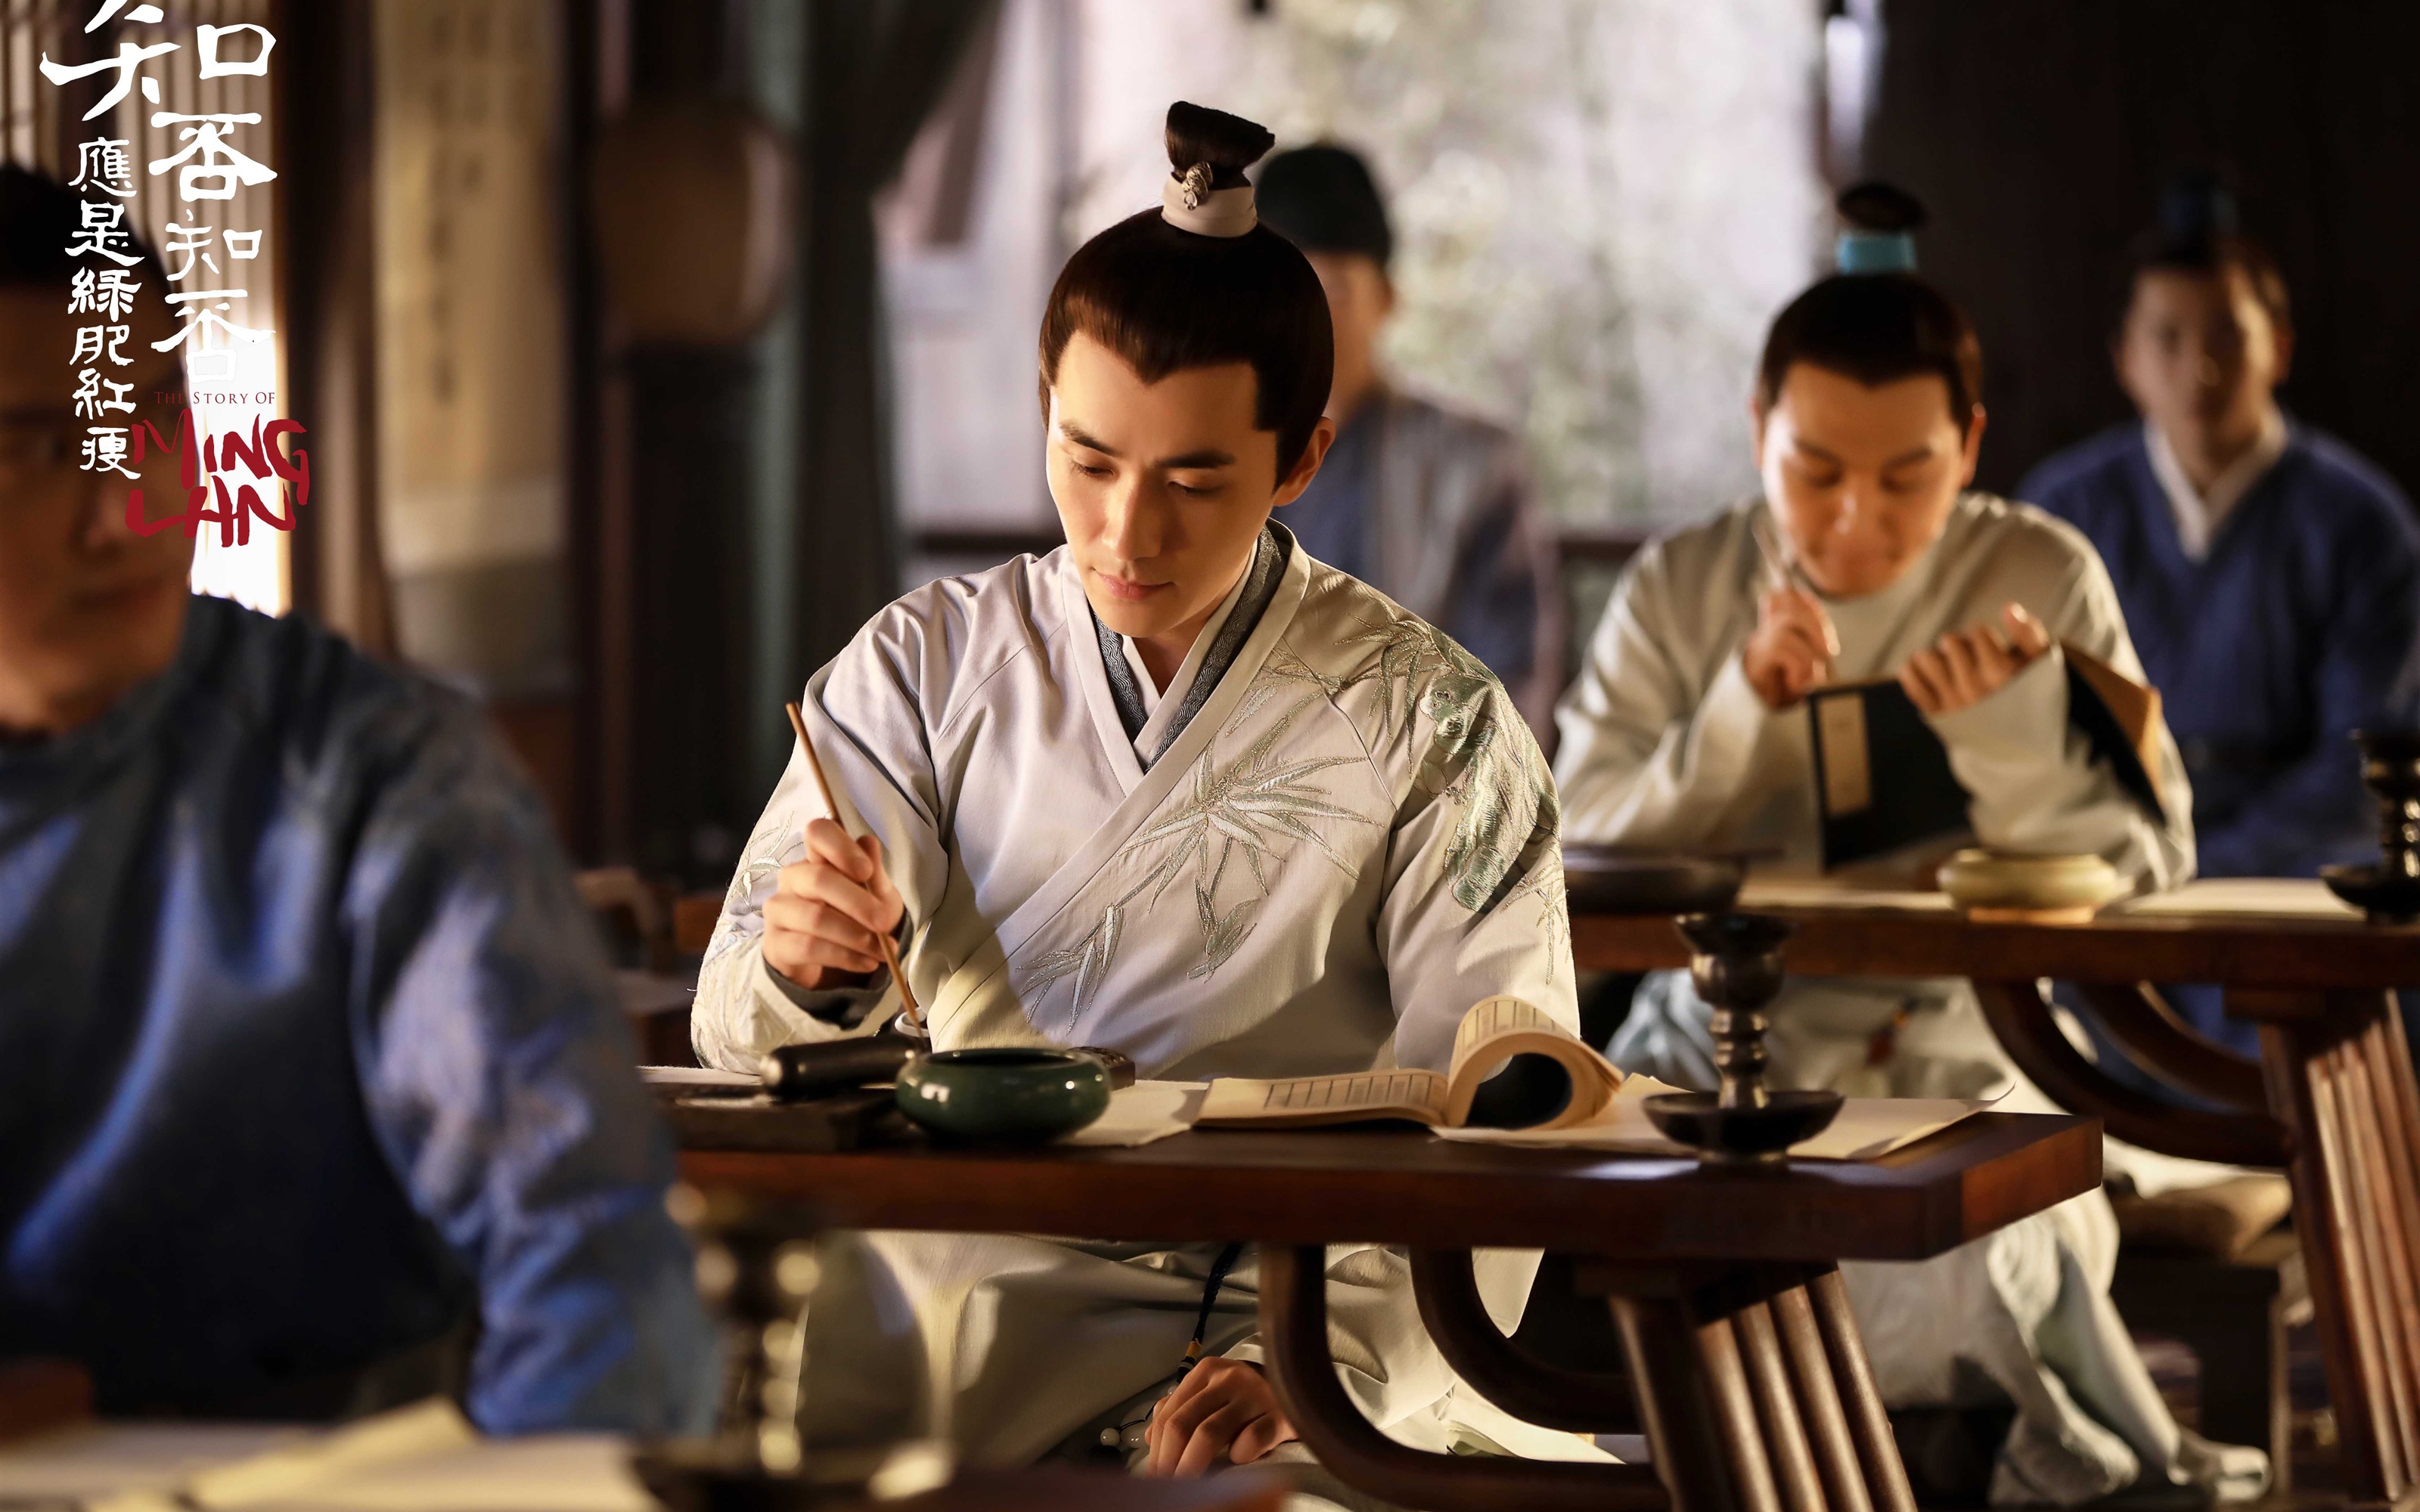 The Story Of MingLan, TV series HD wallpapers #37 - 3200x2000